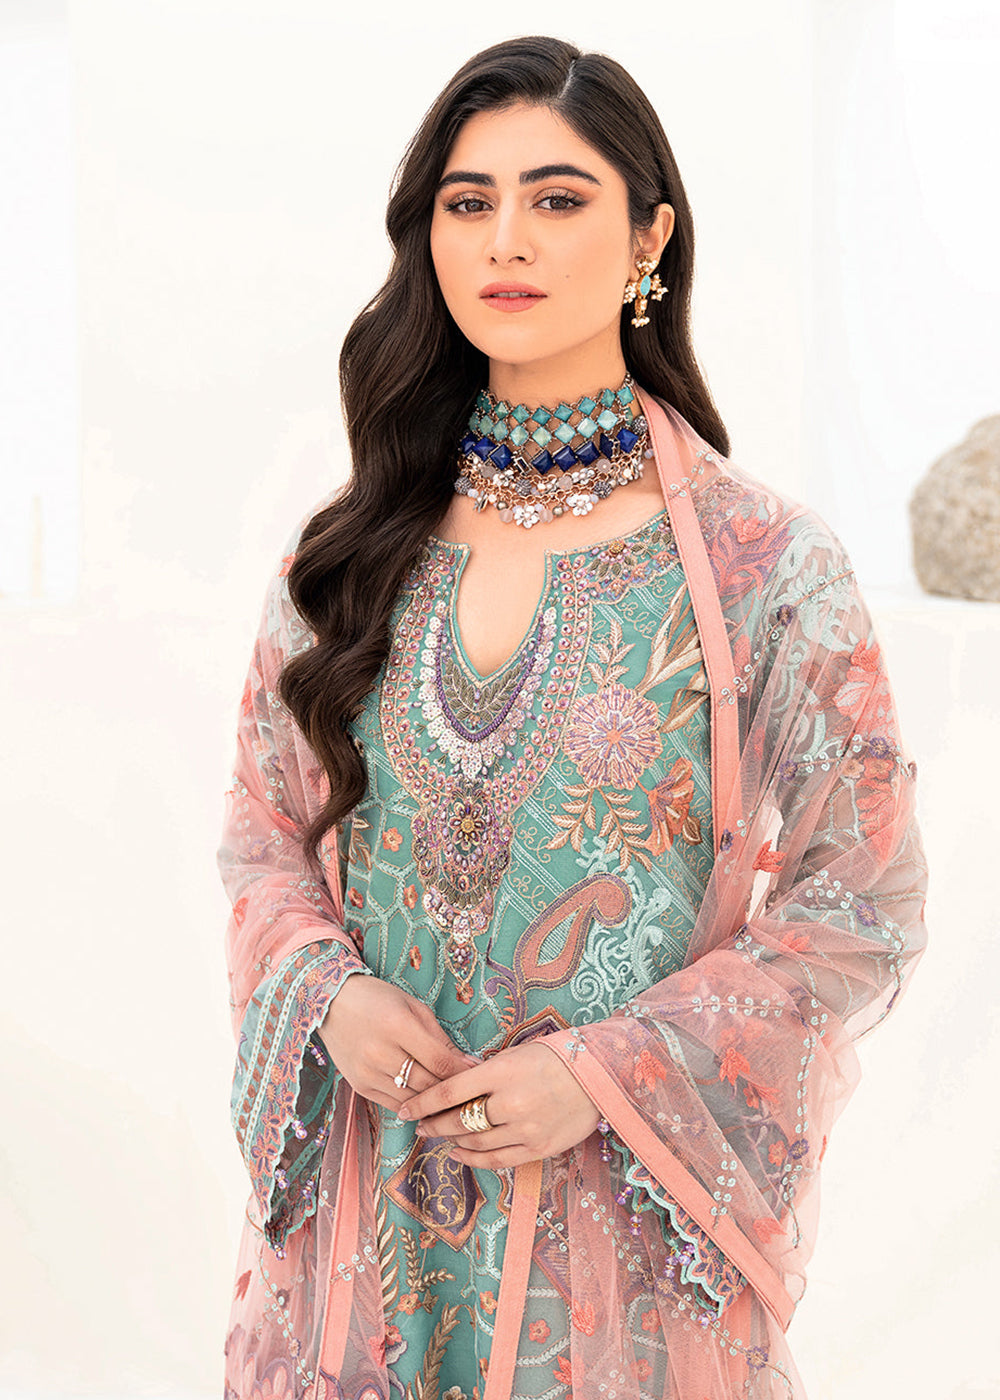 Buy Now Aqua Green Organza Suit - Ramsha Minhal Collection Vol 8 - #M-807 Online in USA, UK, Canada & Worldwide at Empress Clothing.